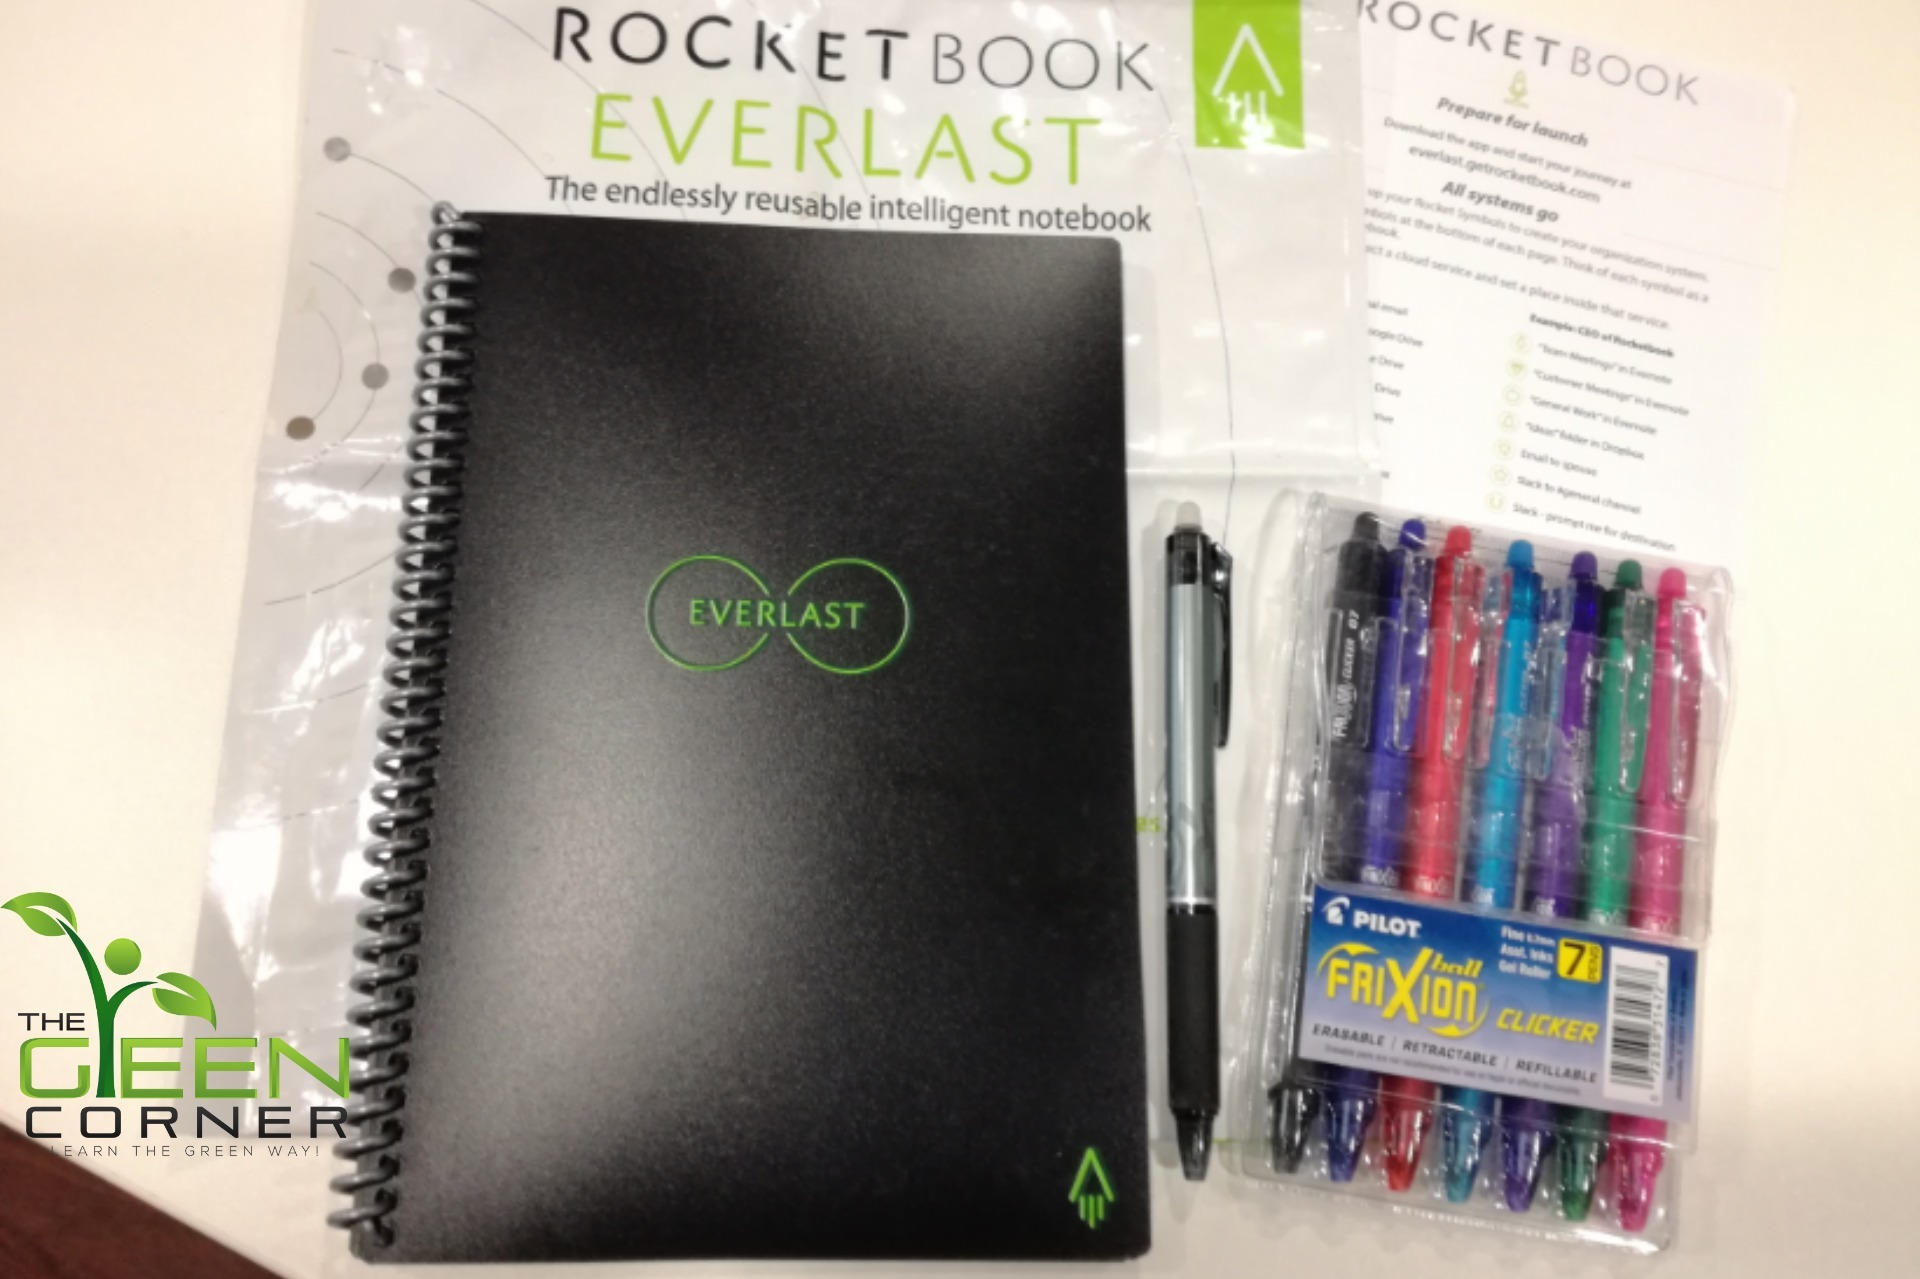 ﻿Green Writing: A Quick look at the Smart Notebook